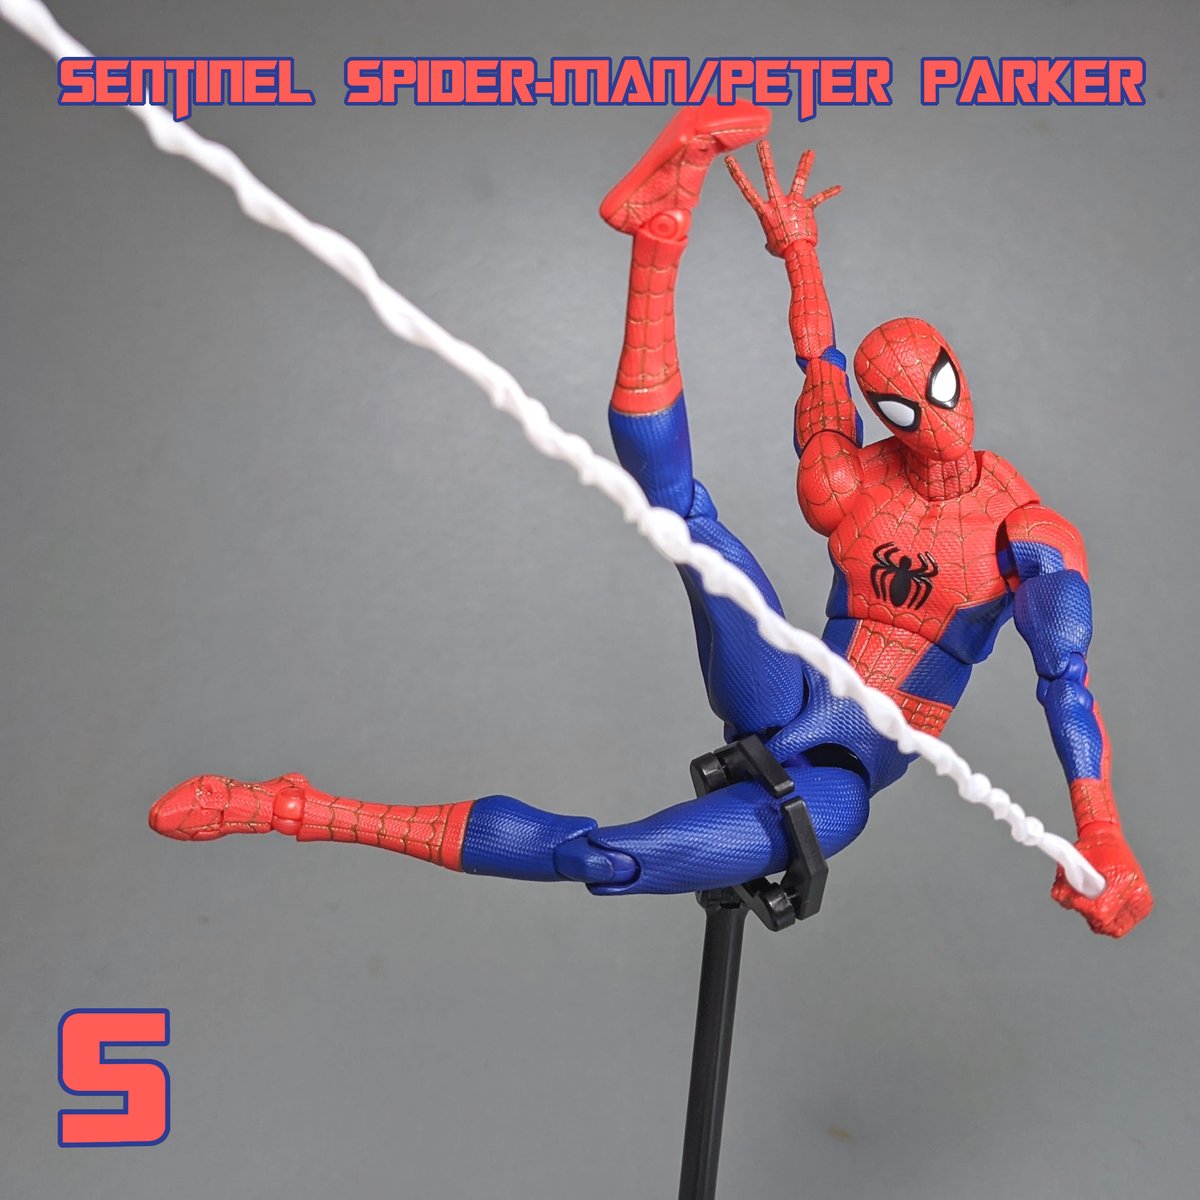 Swinging in at number 5 in Orion Ghia's TOP OF THE BOTS 2022! Your friendly neighbourhood Sentinel with their take on Spider-man AKA Peter Parker! #spiderman #marvel #sentineltoys #totb